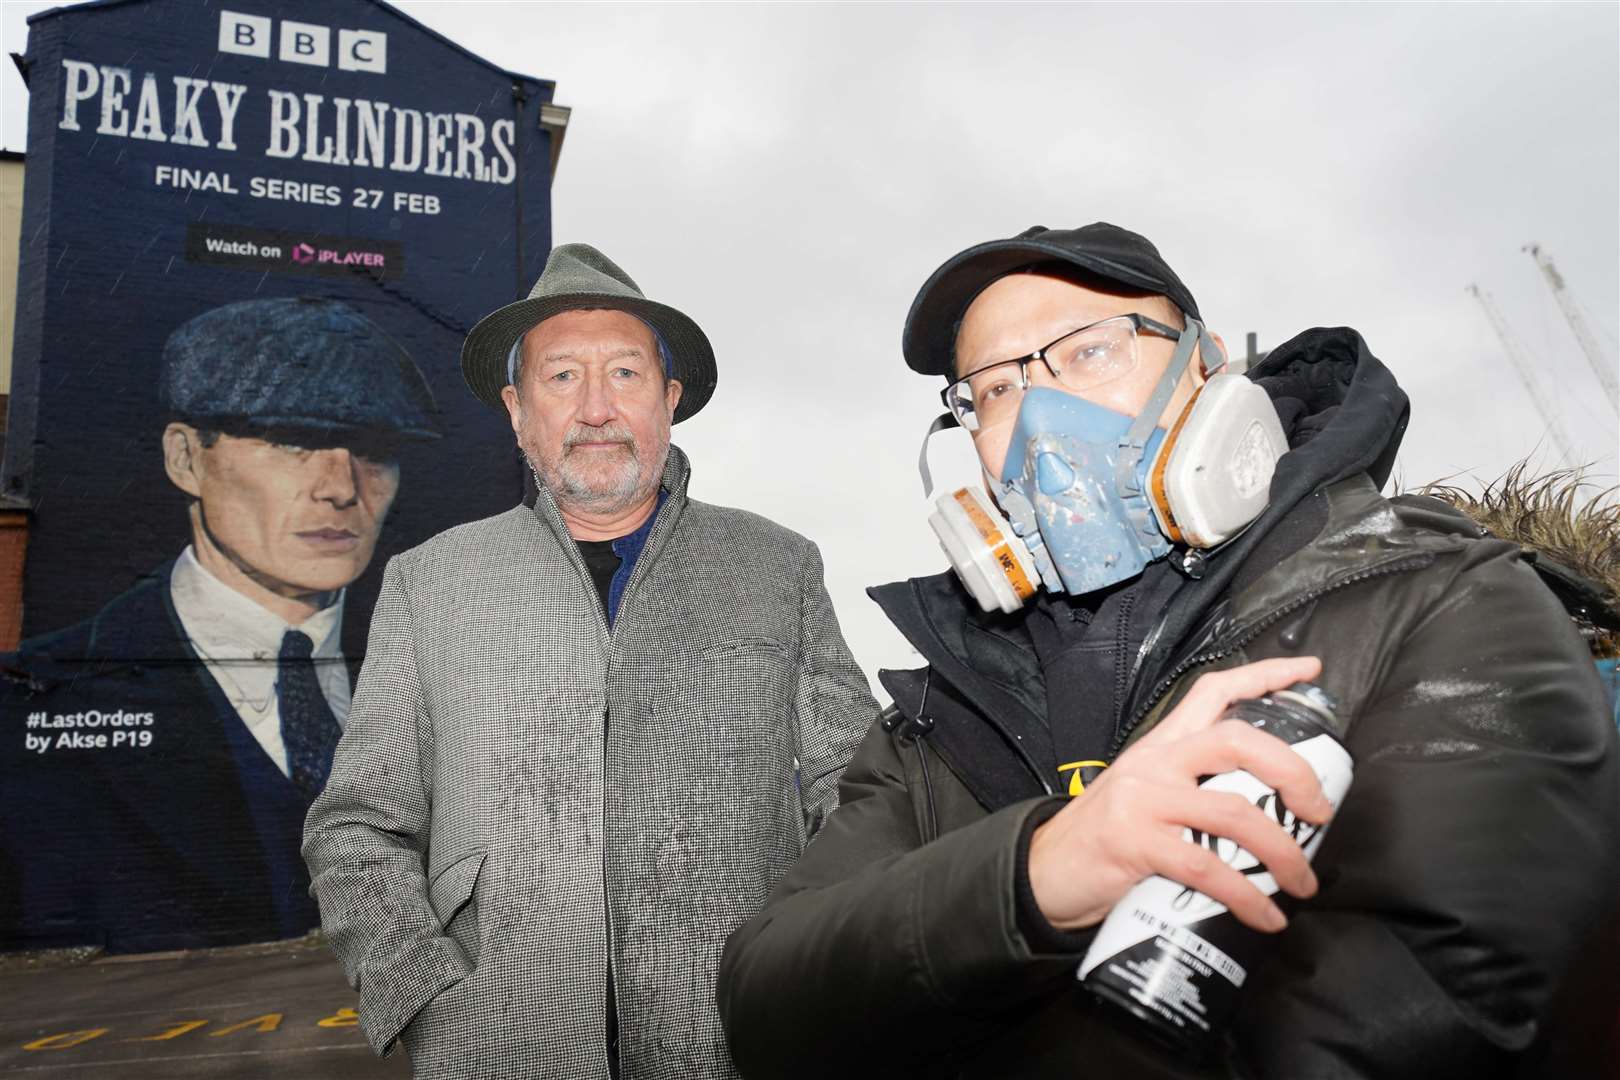 Peaky Blinders creator Steven Knight at the unveiling of the mural by artist Akse P19 (Jacob King/PA)